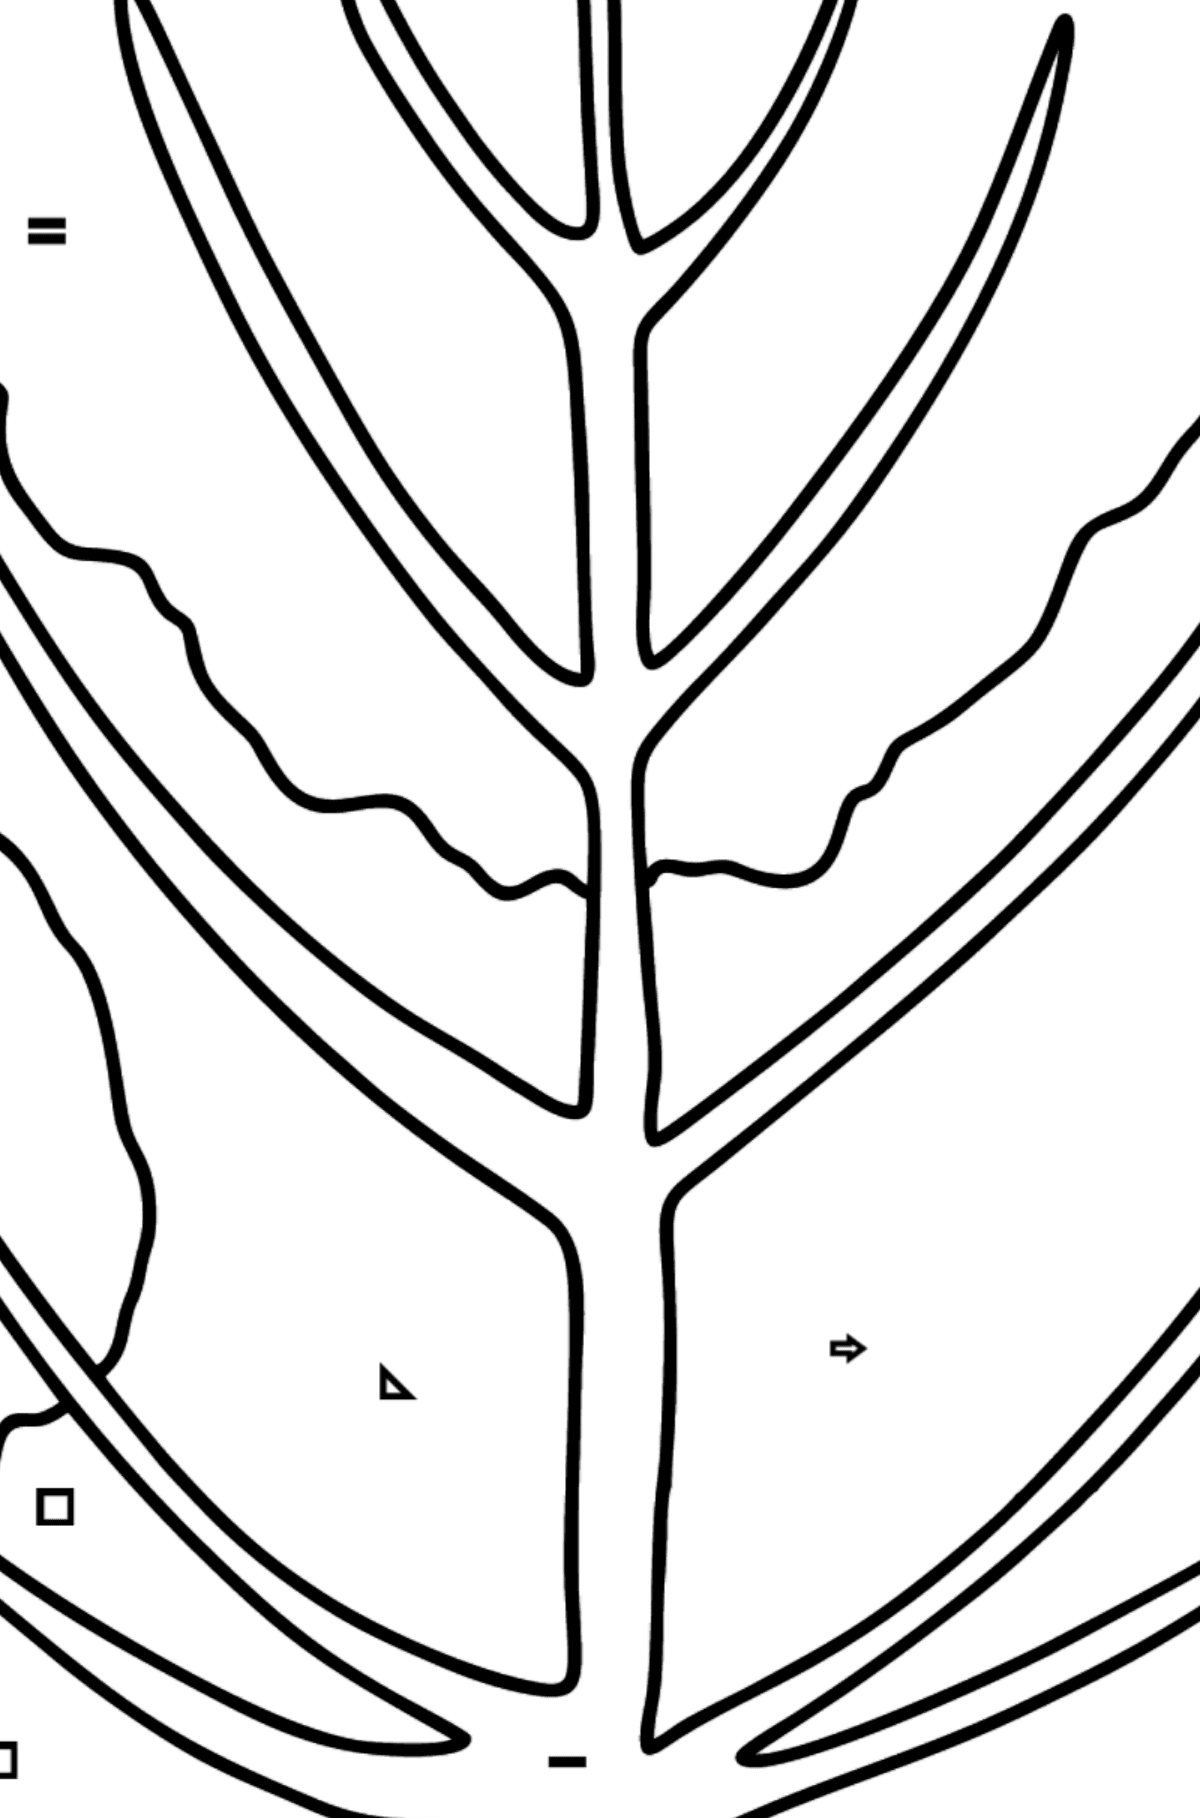 Aspen Leaf coloring page - Coloring by Symbols and Geometric Shapes for Kids